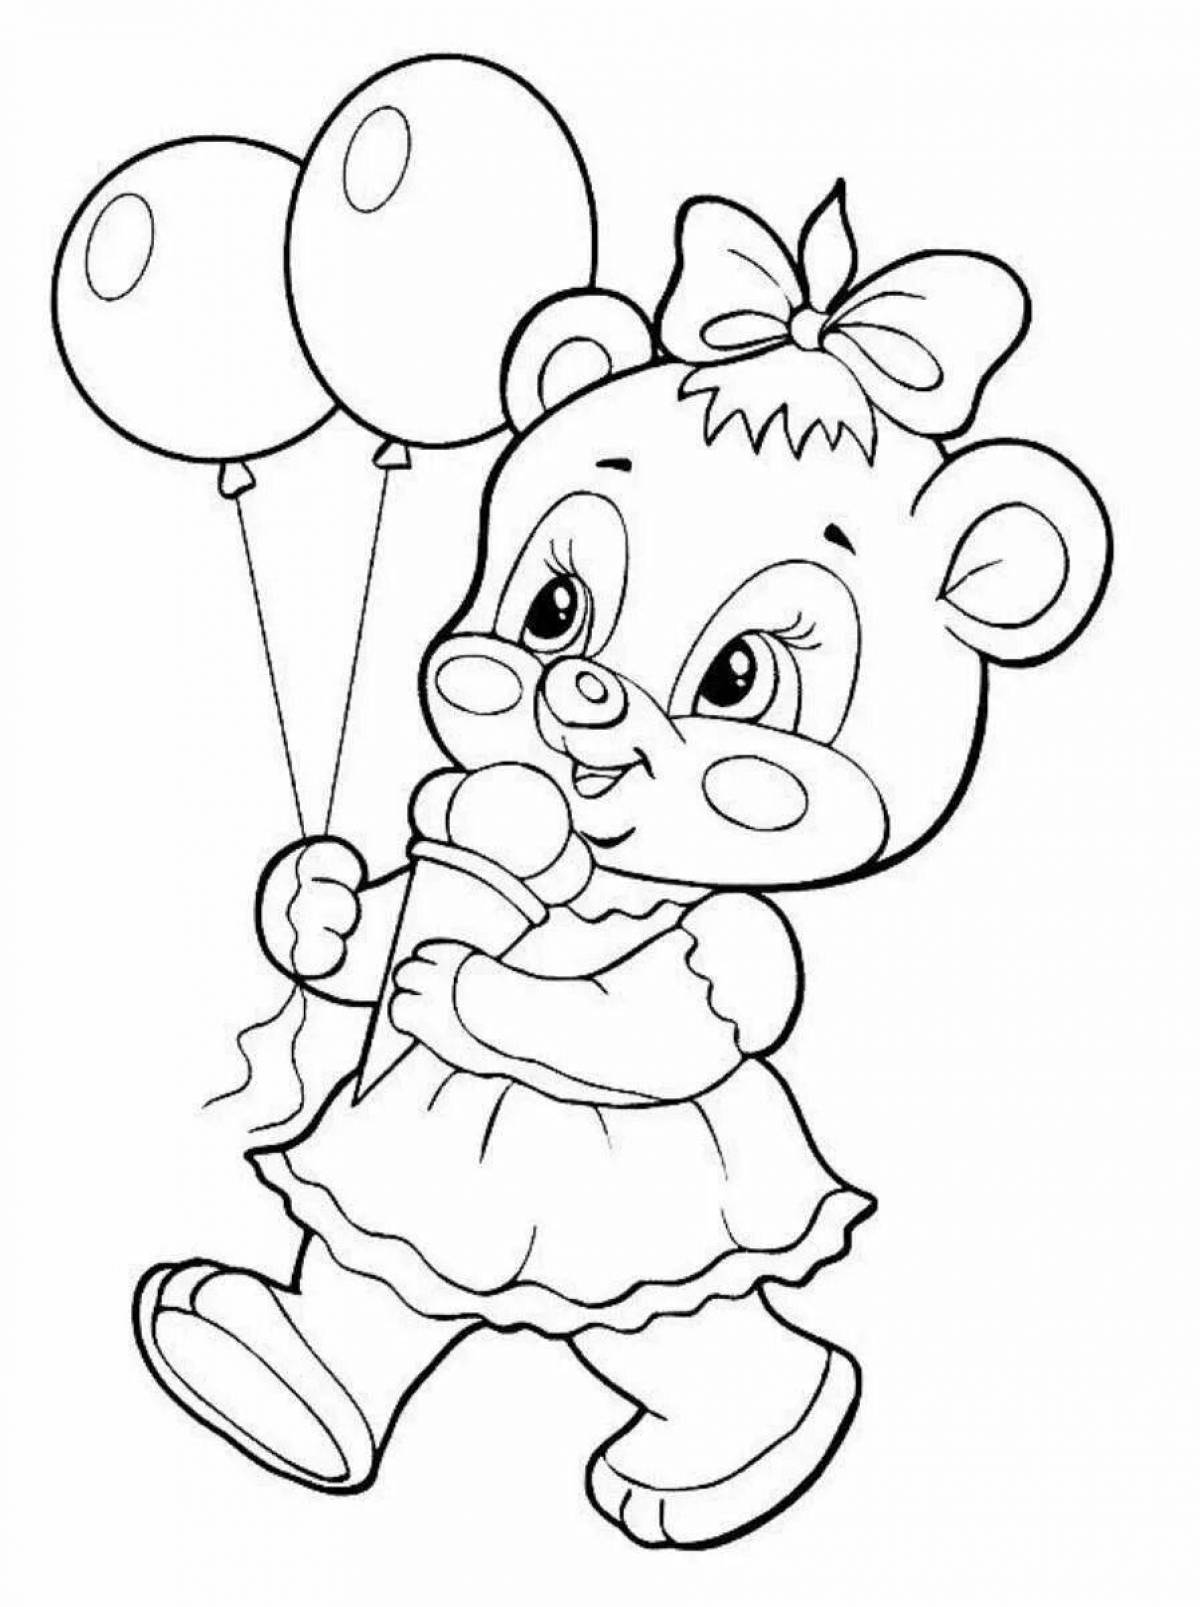 Shiny bear coloring book for girls